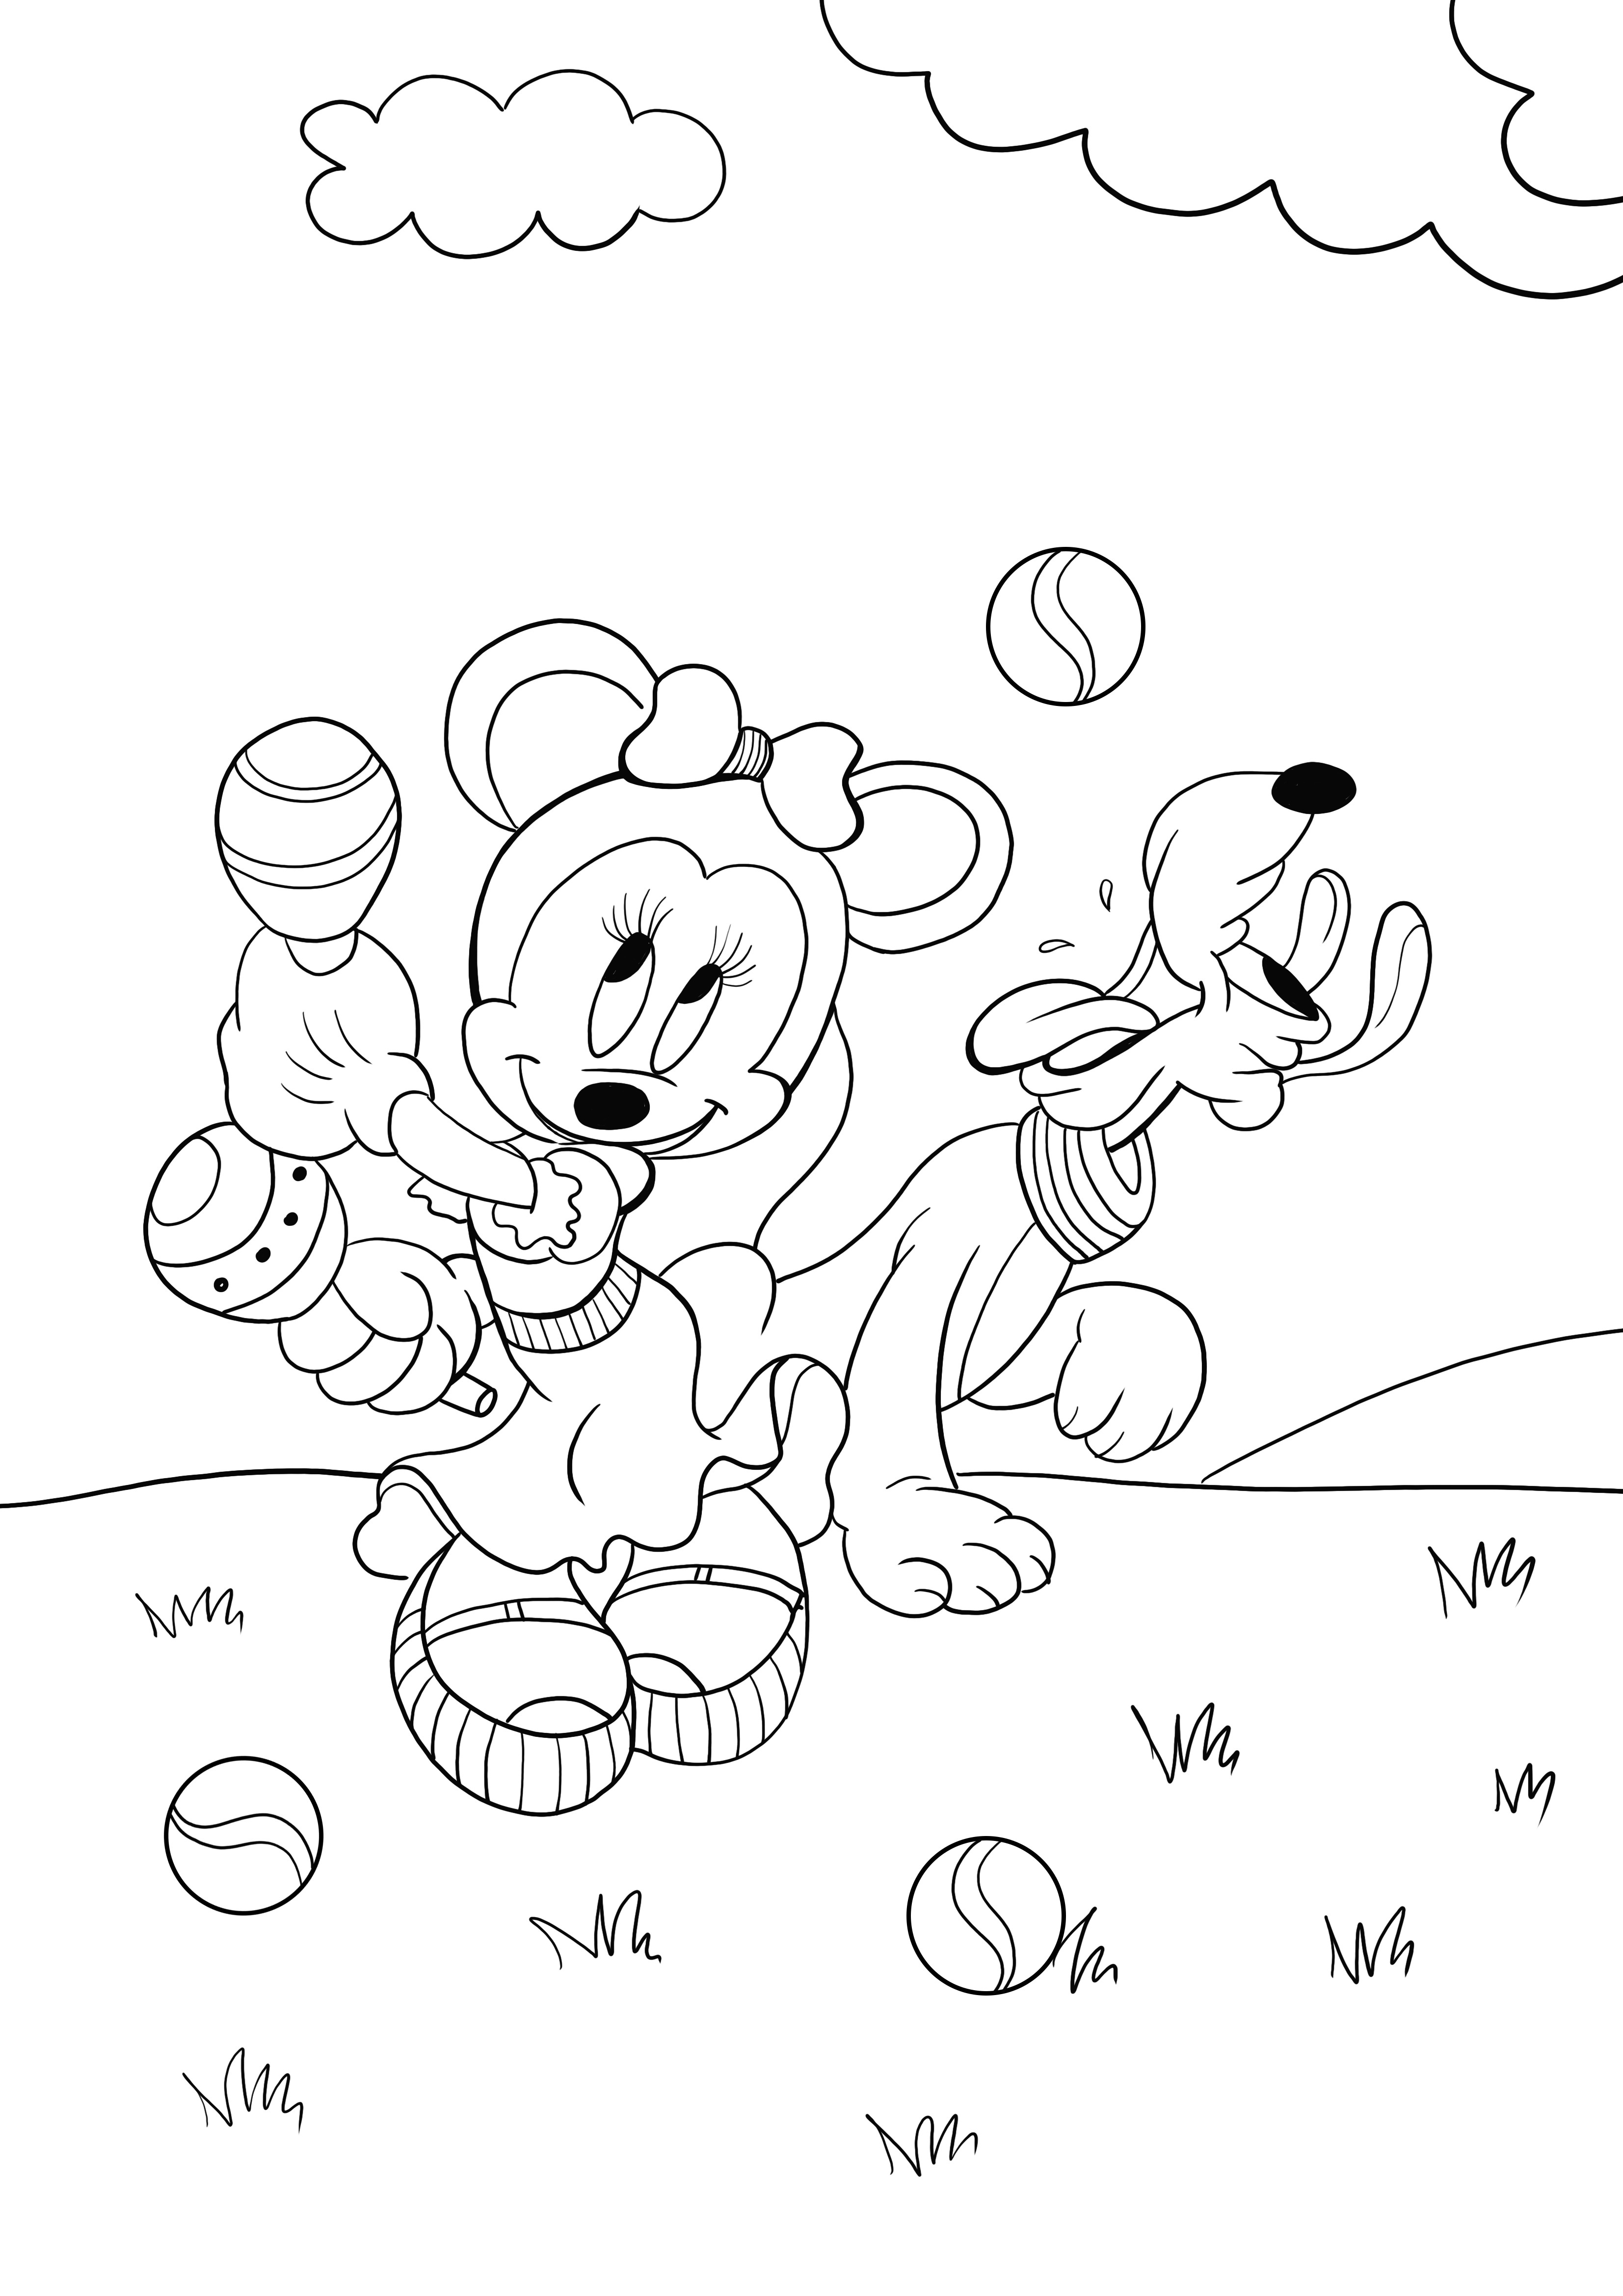 Minnie and Pluto free coloring and printing